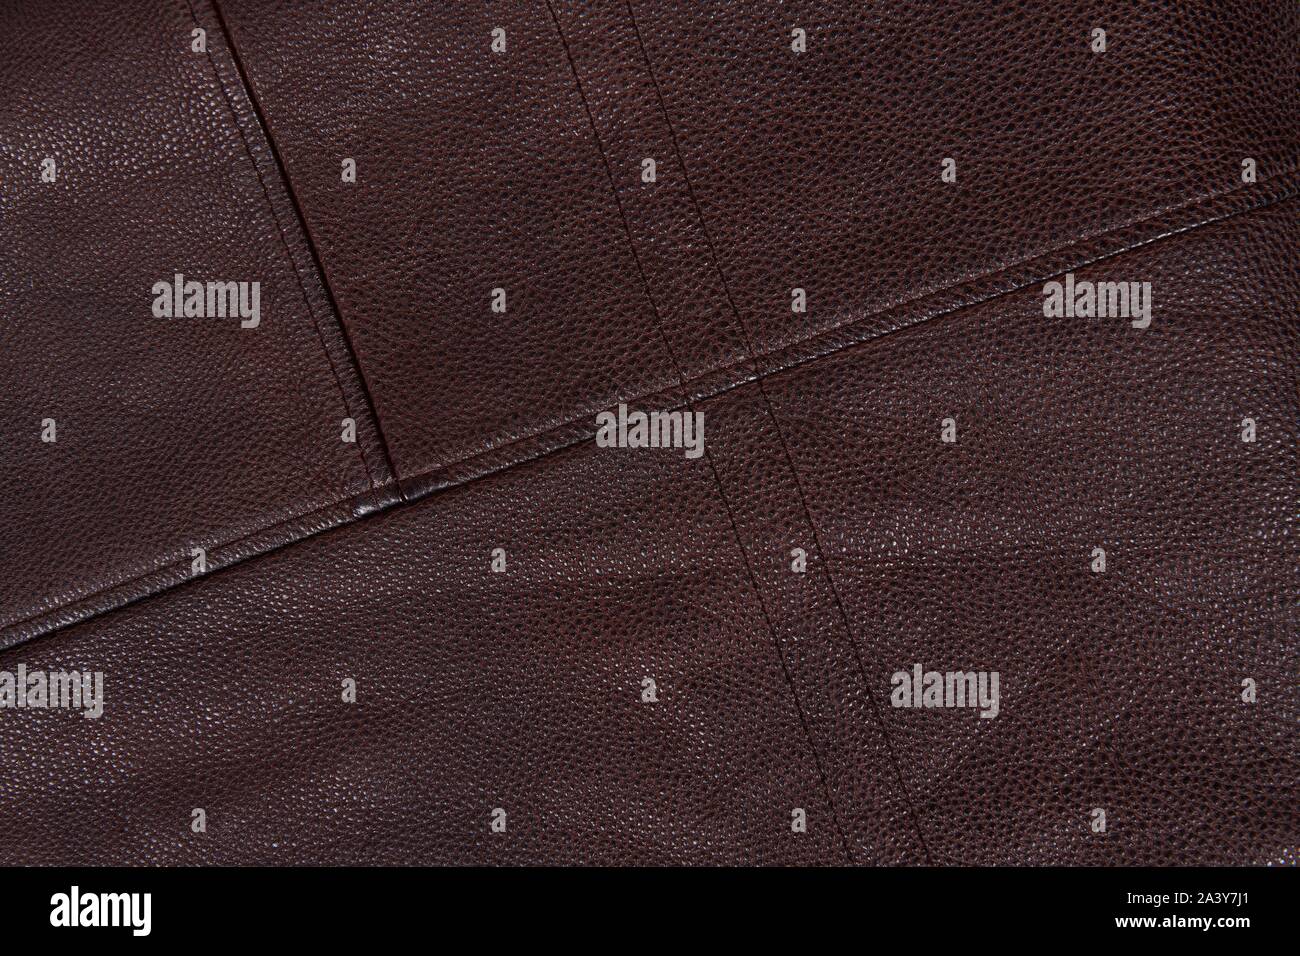 Dark brown stitched leather background. Asymmetric seams. Rough surface with free space. Expensive material sample. Handwork. Seat upholstery or leath Stock Photo